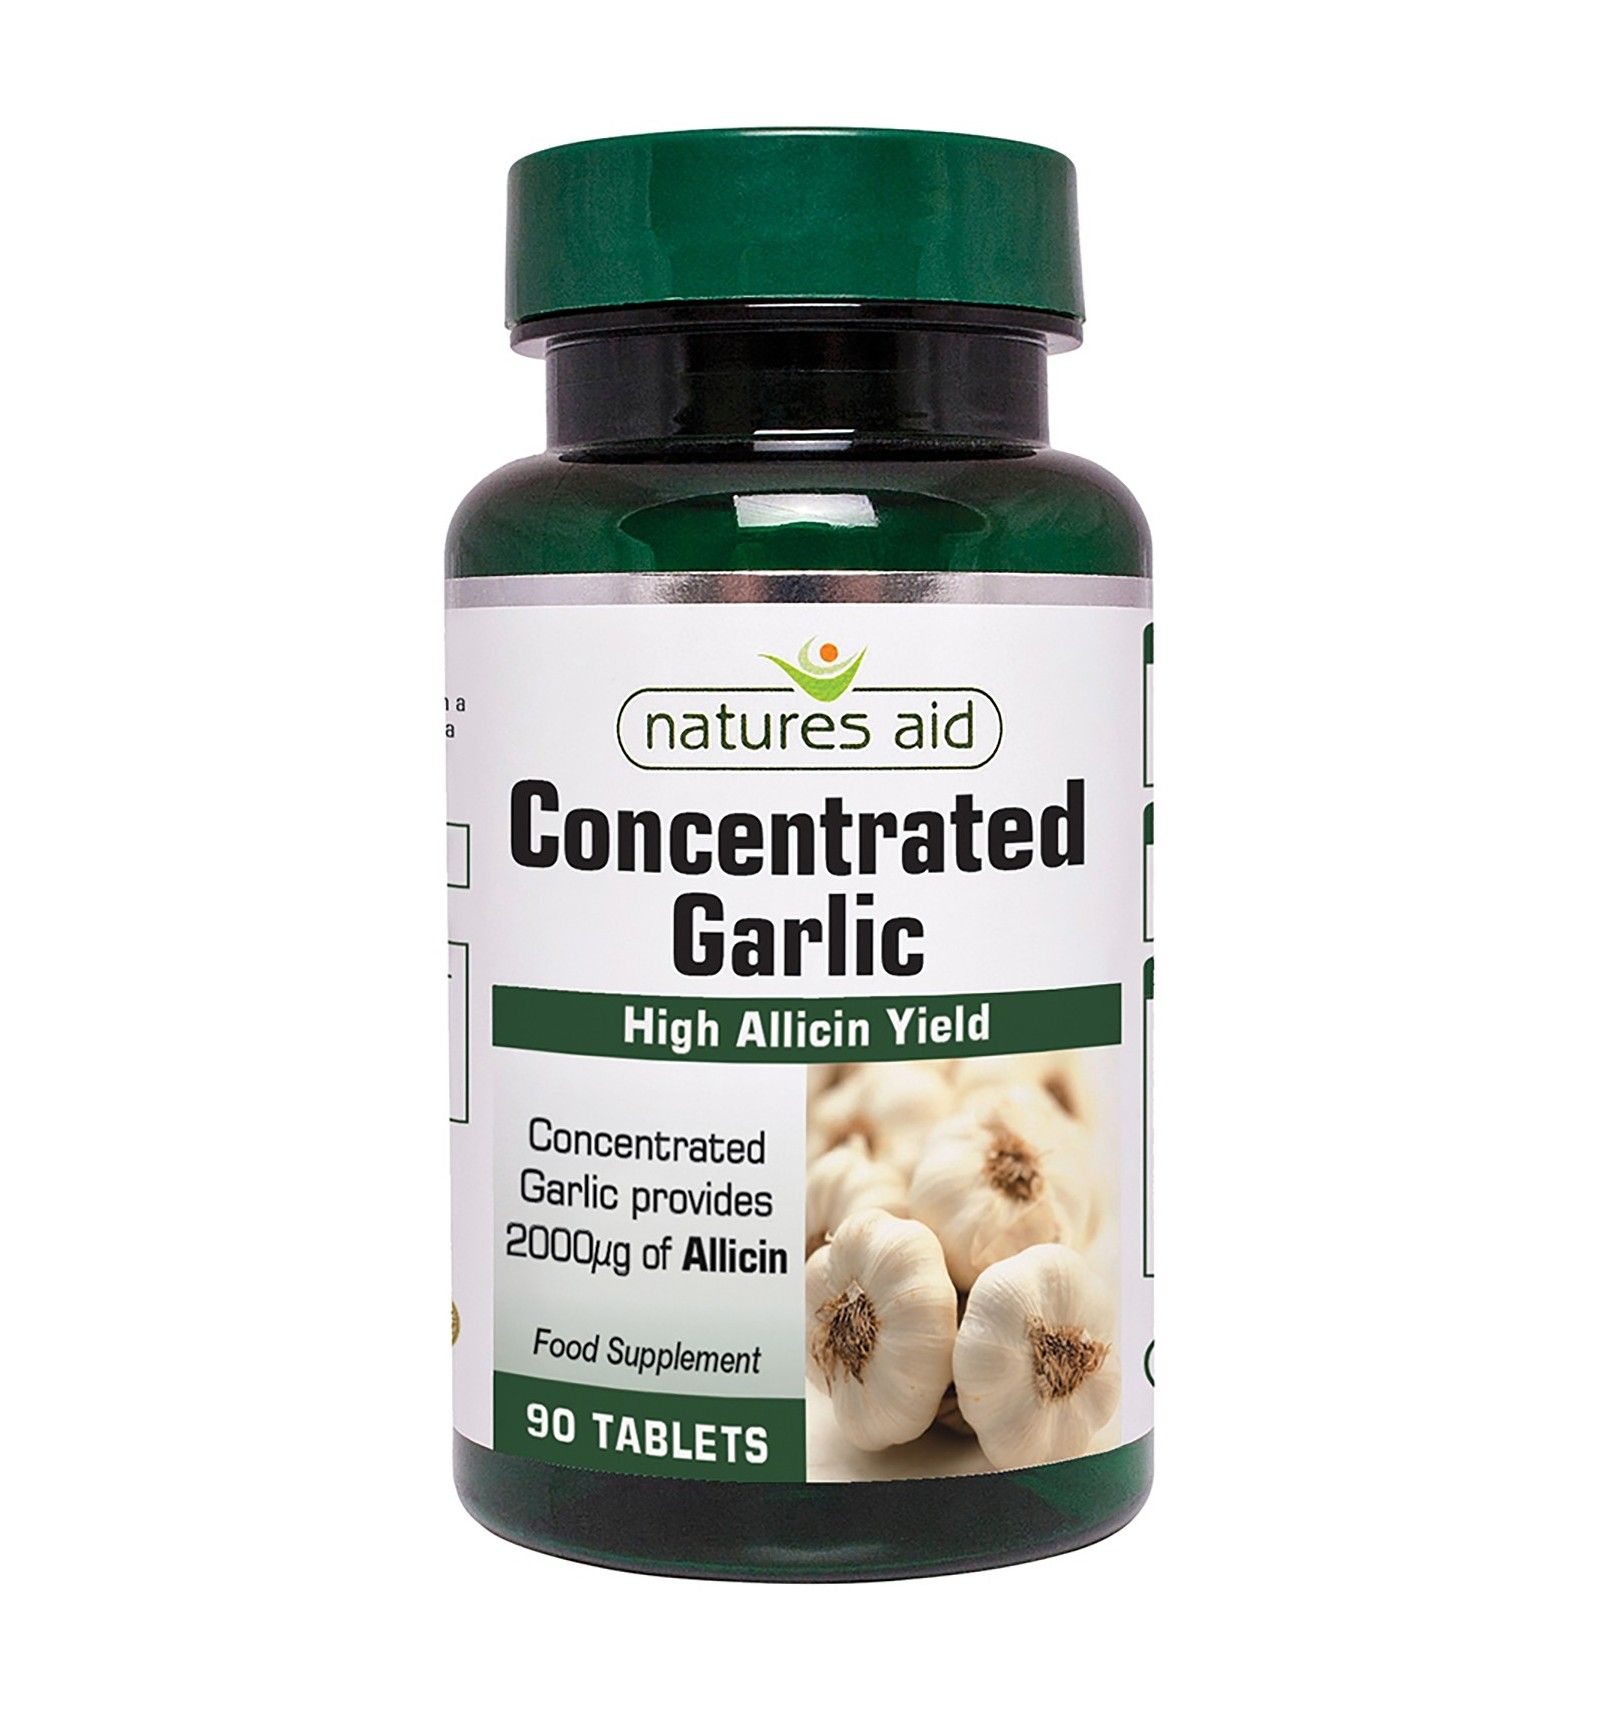 Natures Aid Garlic Concentrated Allicin - 90 Tablets